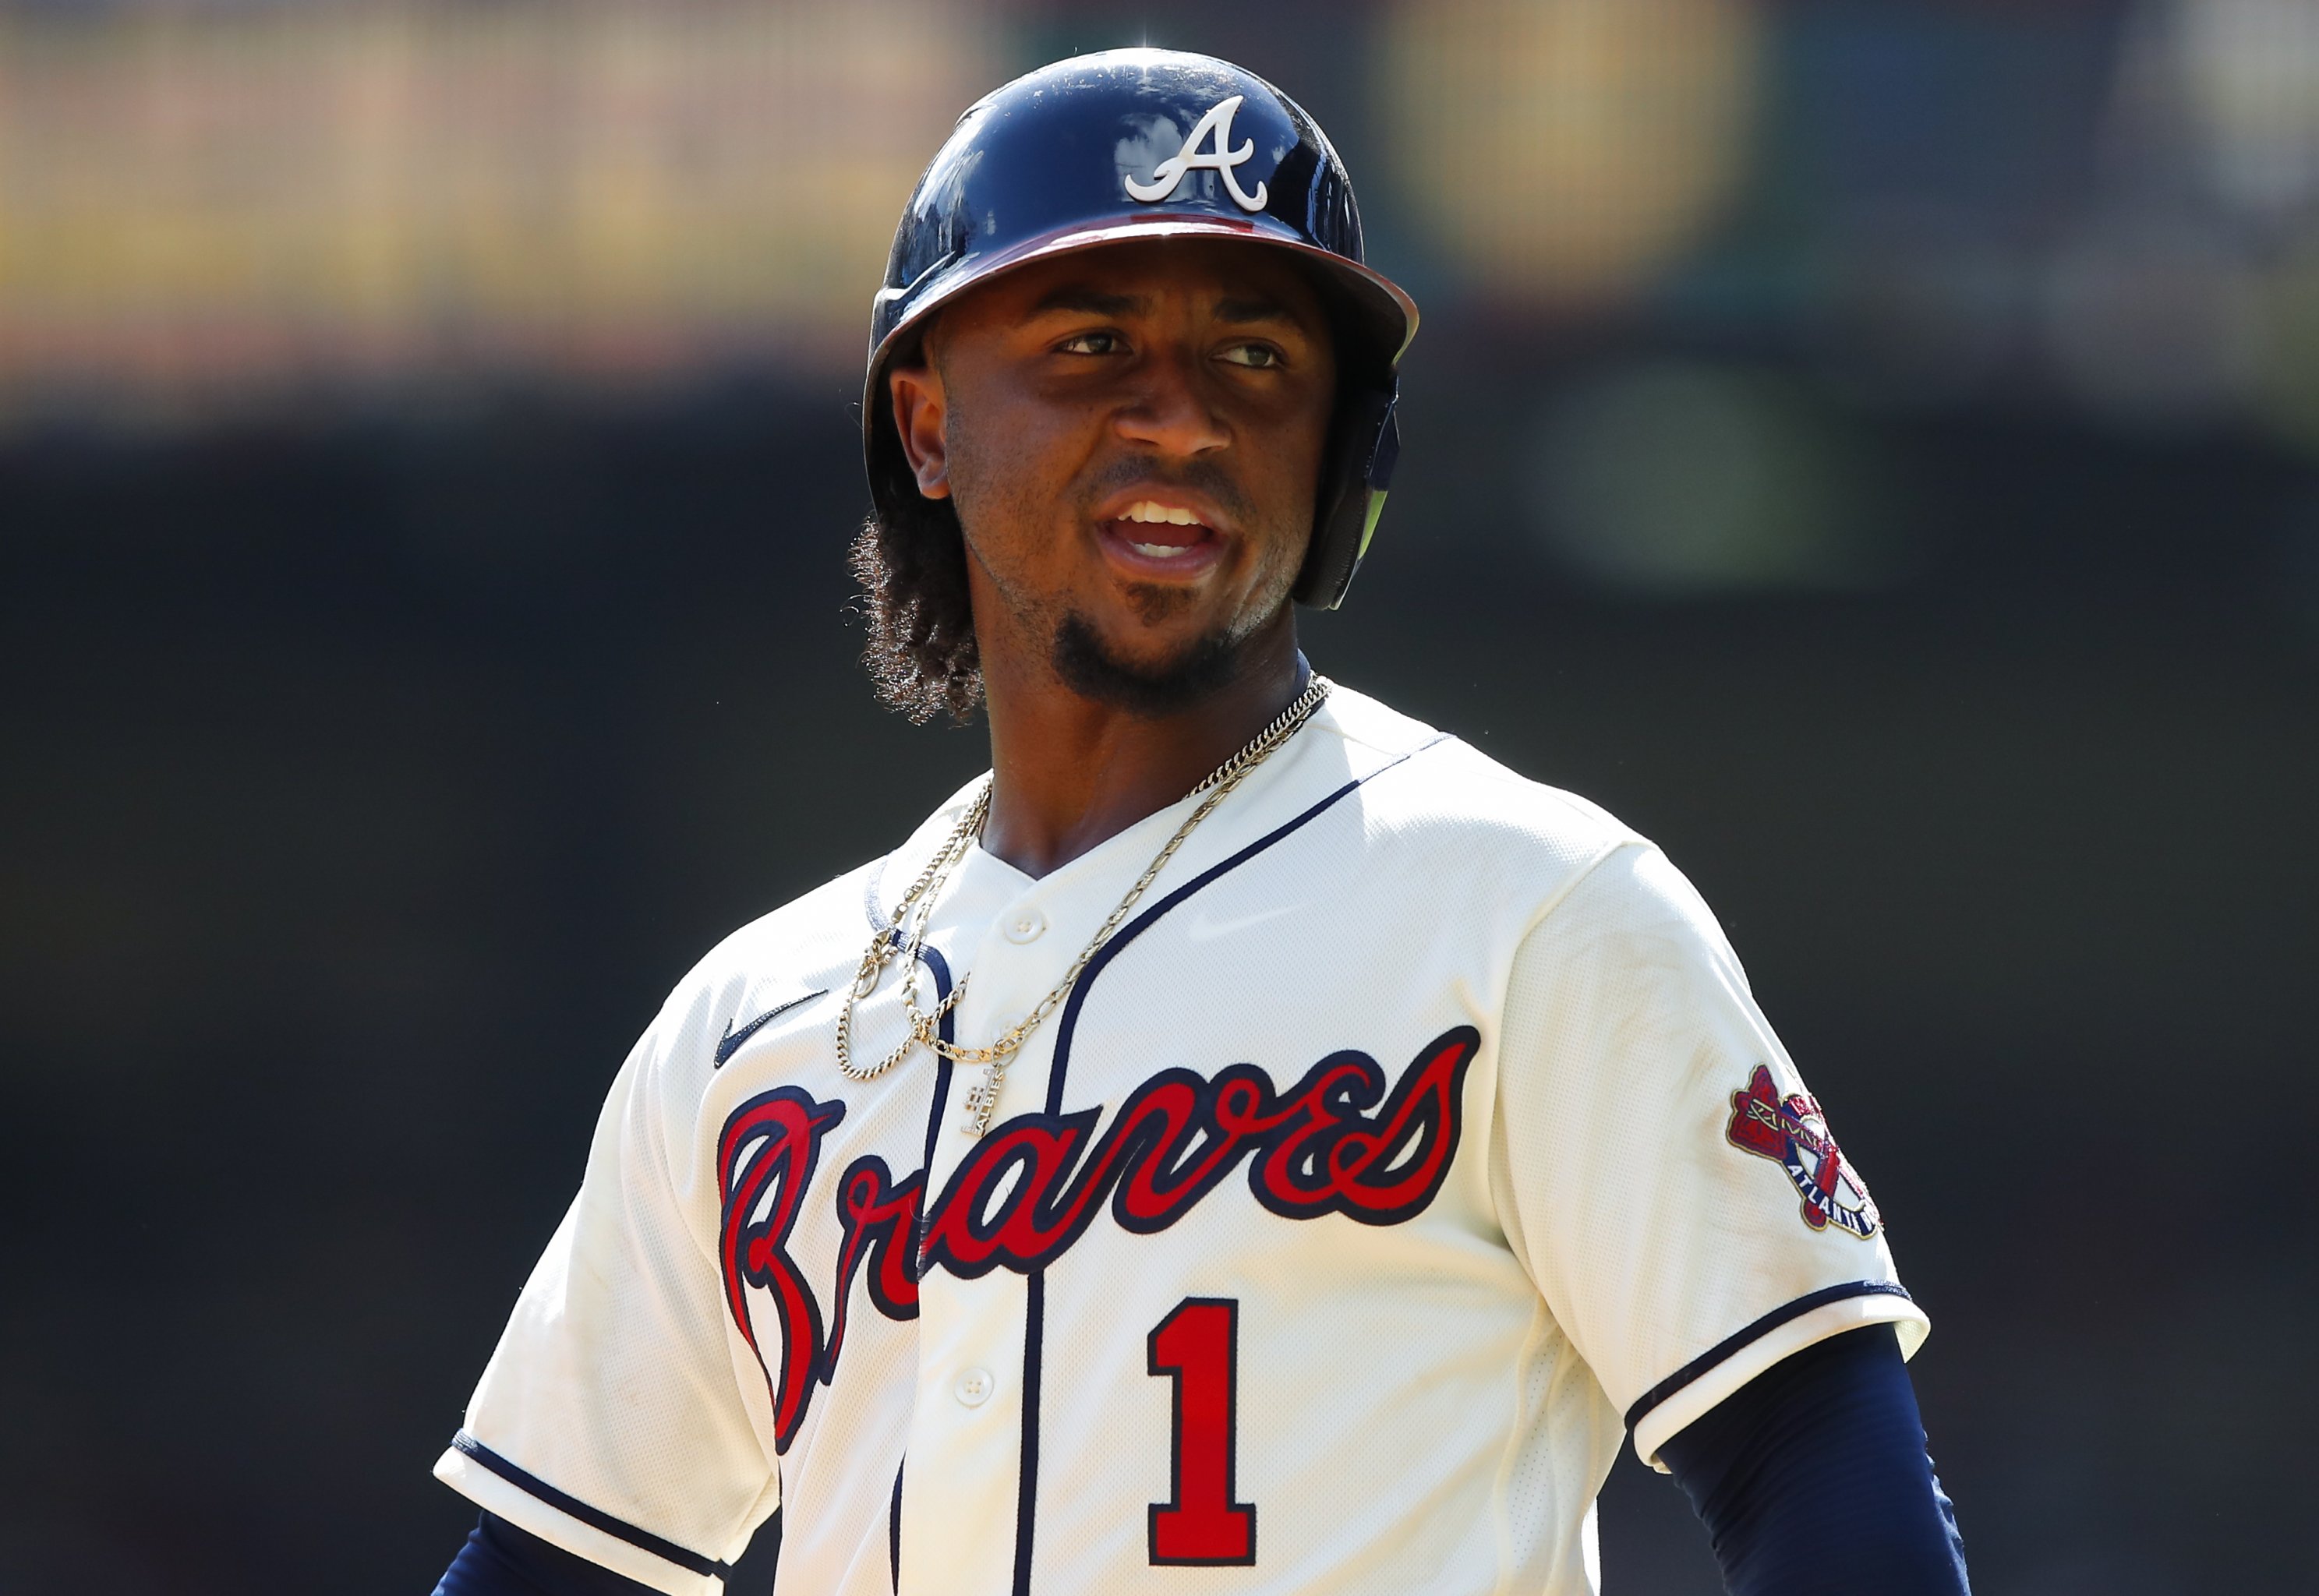 Braves rookie continues to impress